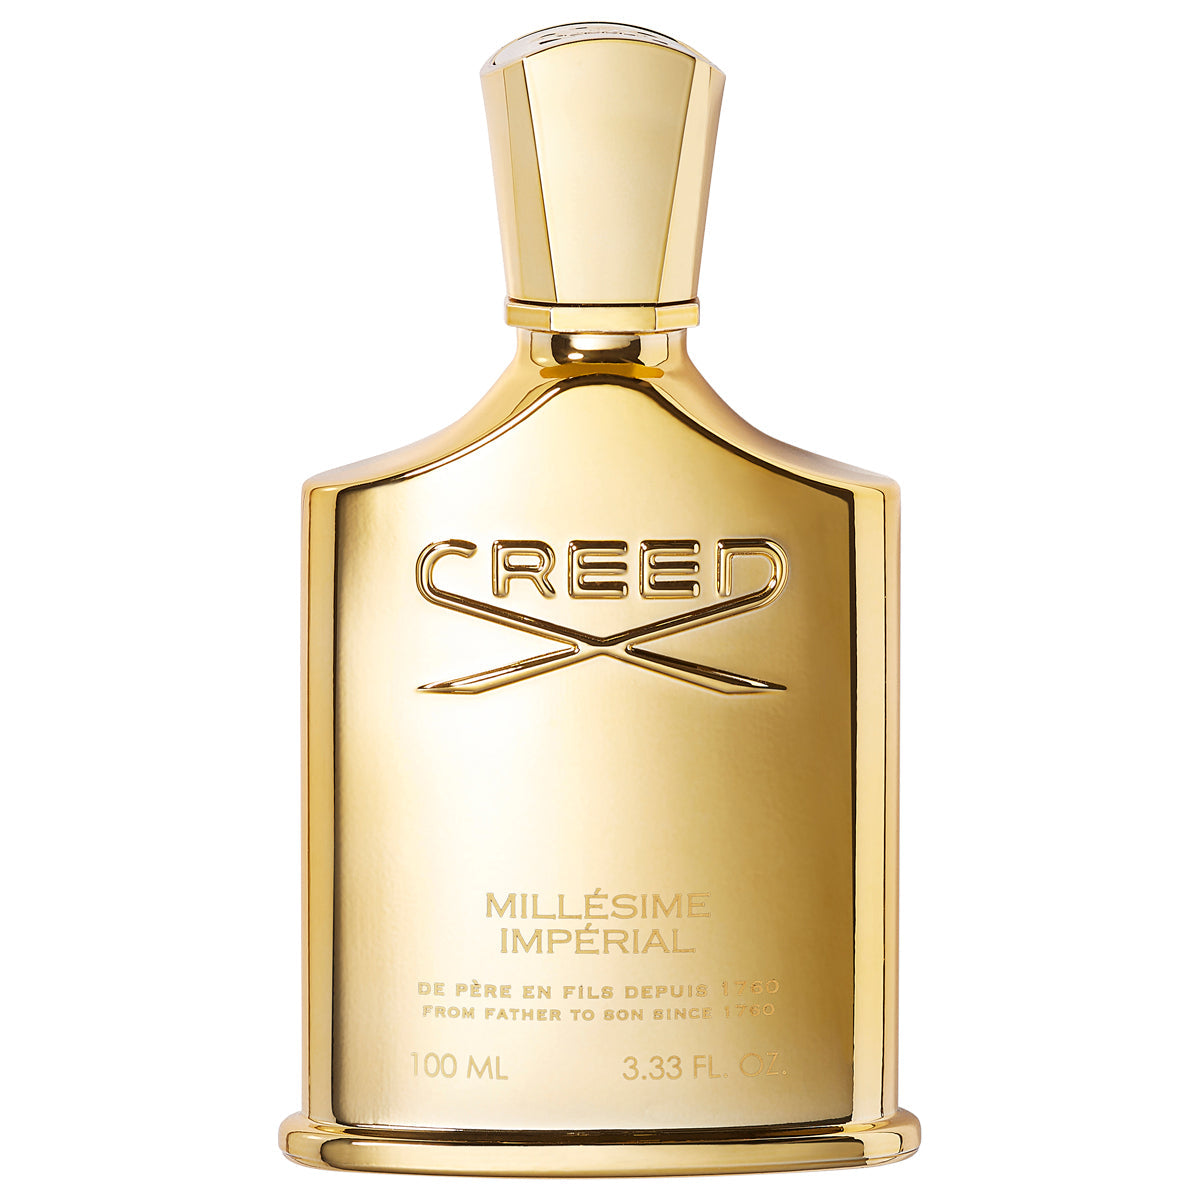 Creed Creed Imperial - 100 ML